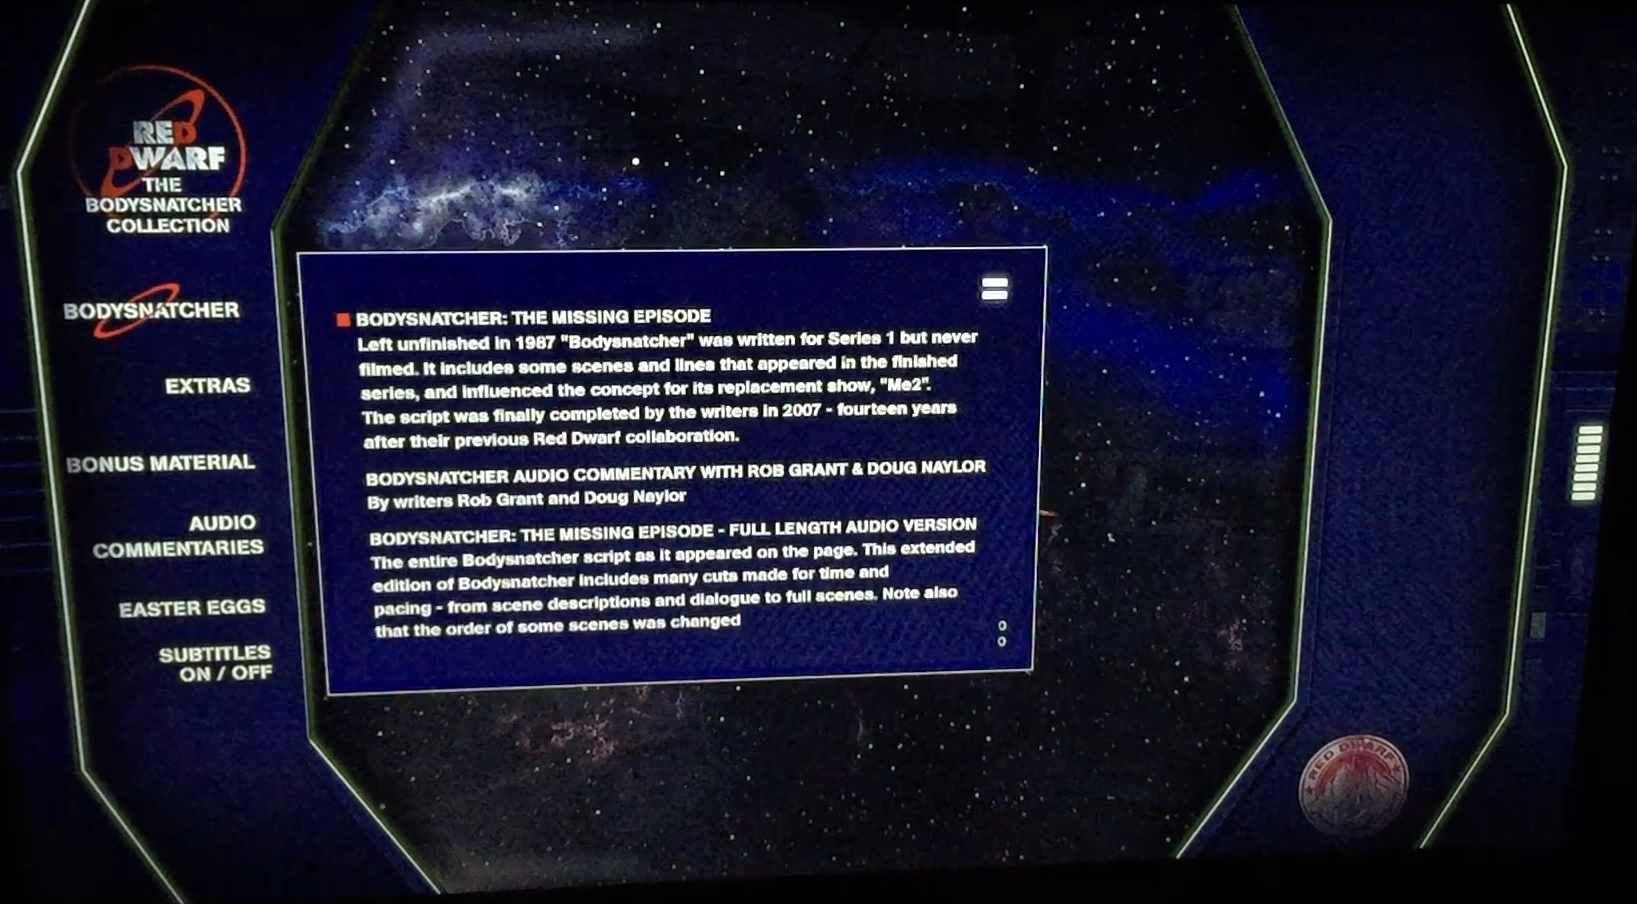 Menu for the Red Dwarf Bodysnatcher Blu-ray disc. Against a dark blue background on the left are options in white text for Bodysnatcher, Extras, Bonus Material, Audio Commentaries, Easter Eggs and Subtitles. The Bodysnatcher option is selected, revealing a large text box over a starry space background, with white text explaining the options for viewing the episode in its standard form with or without commentary, or a longer uncut version.